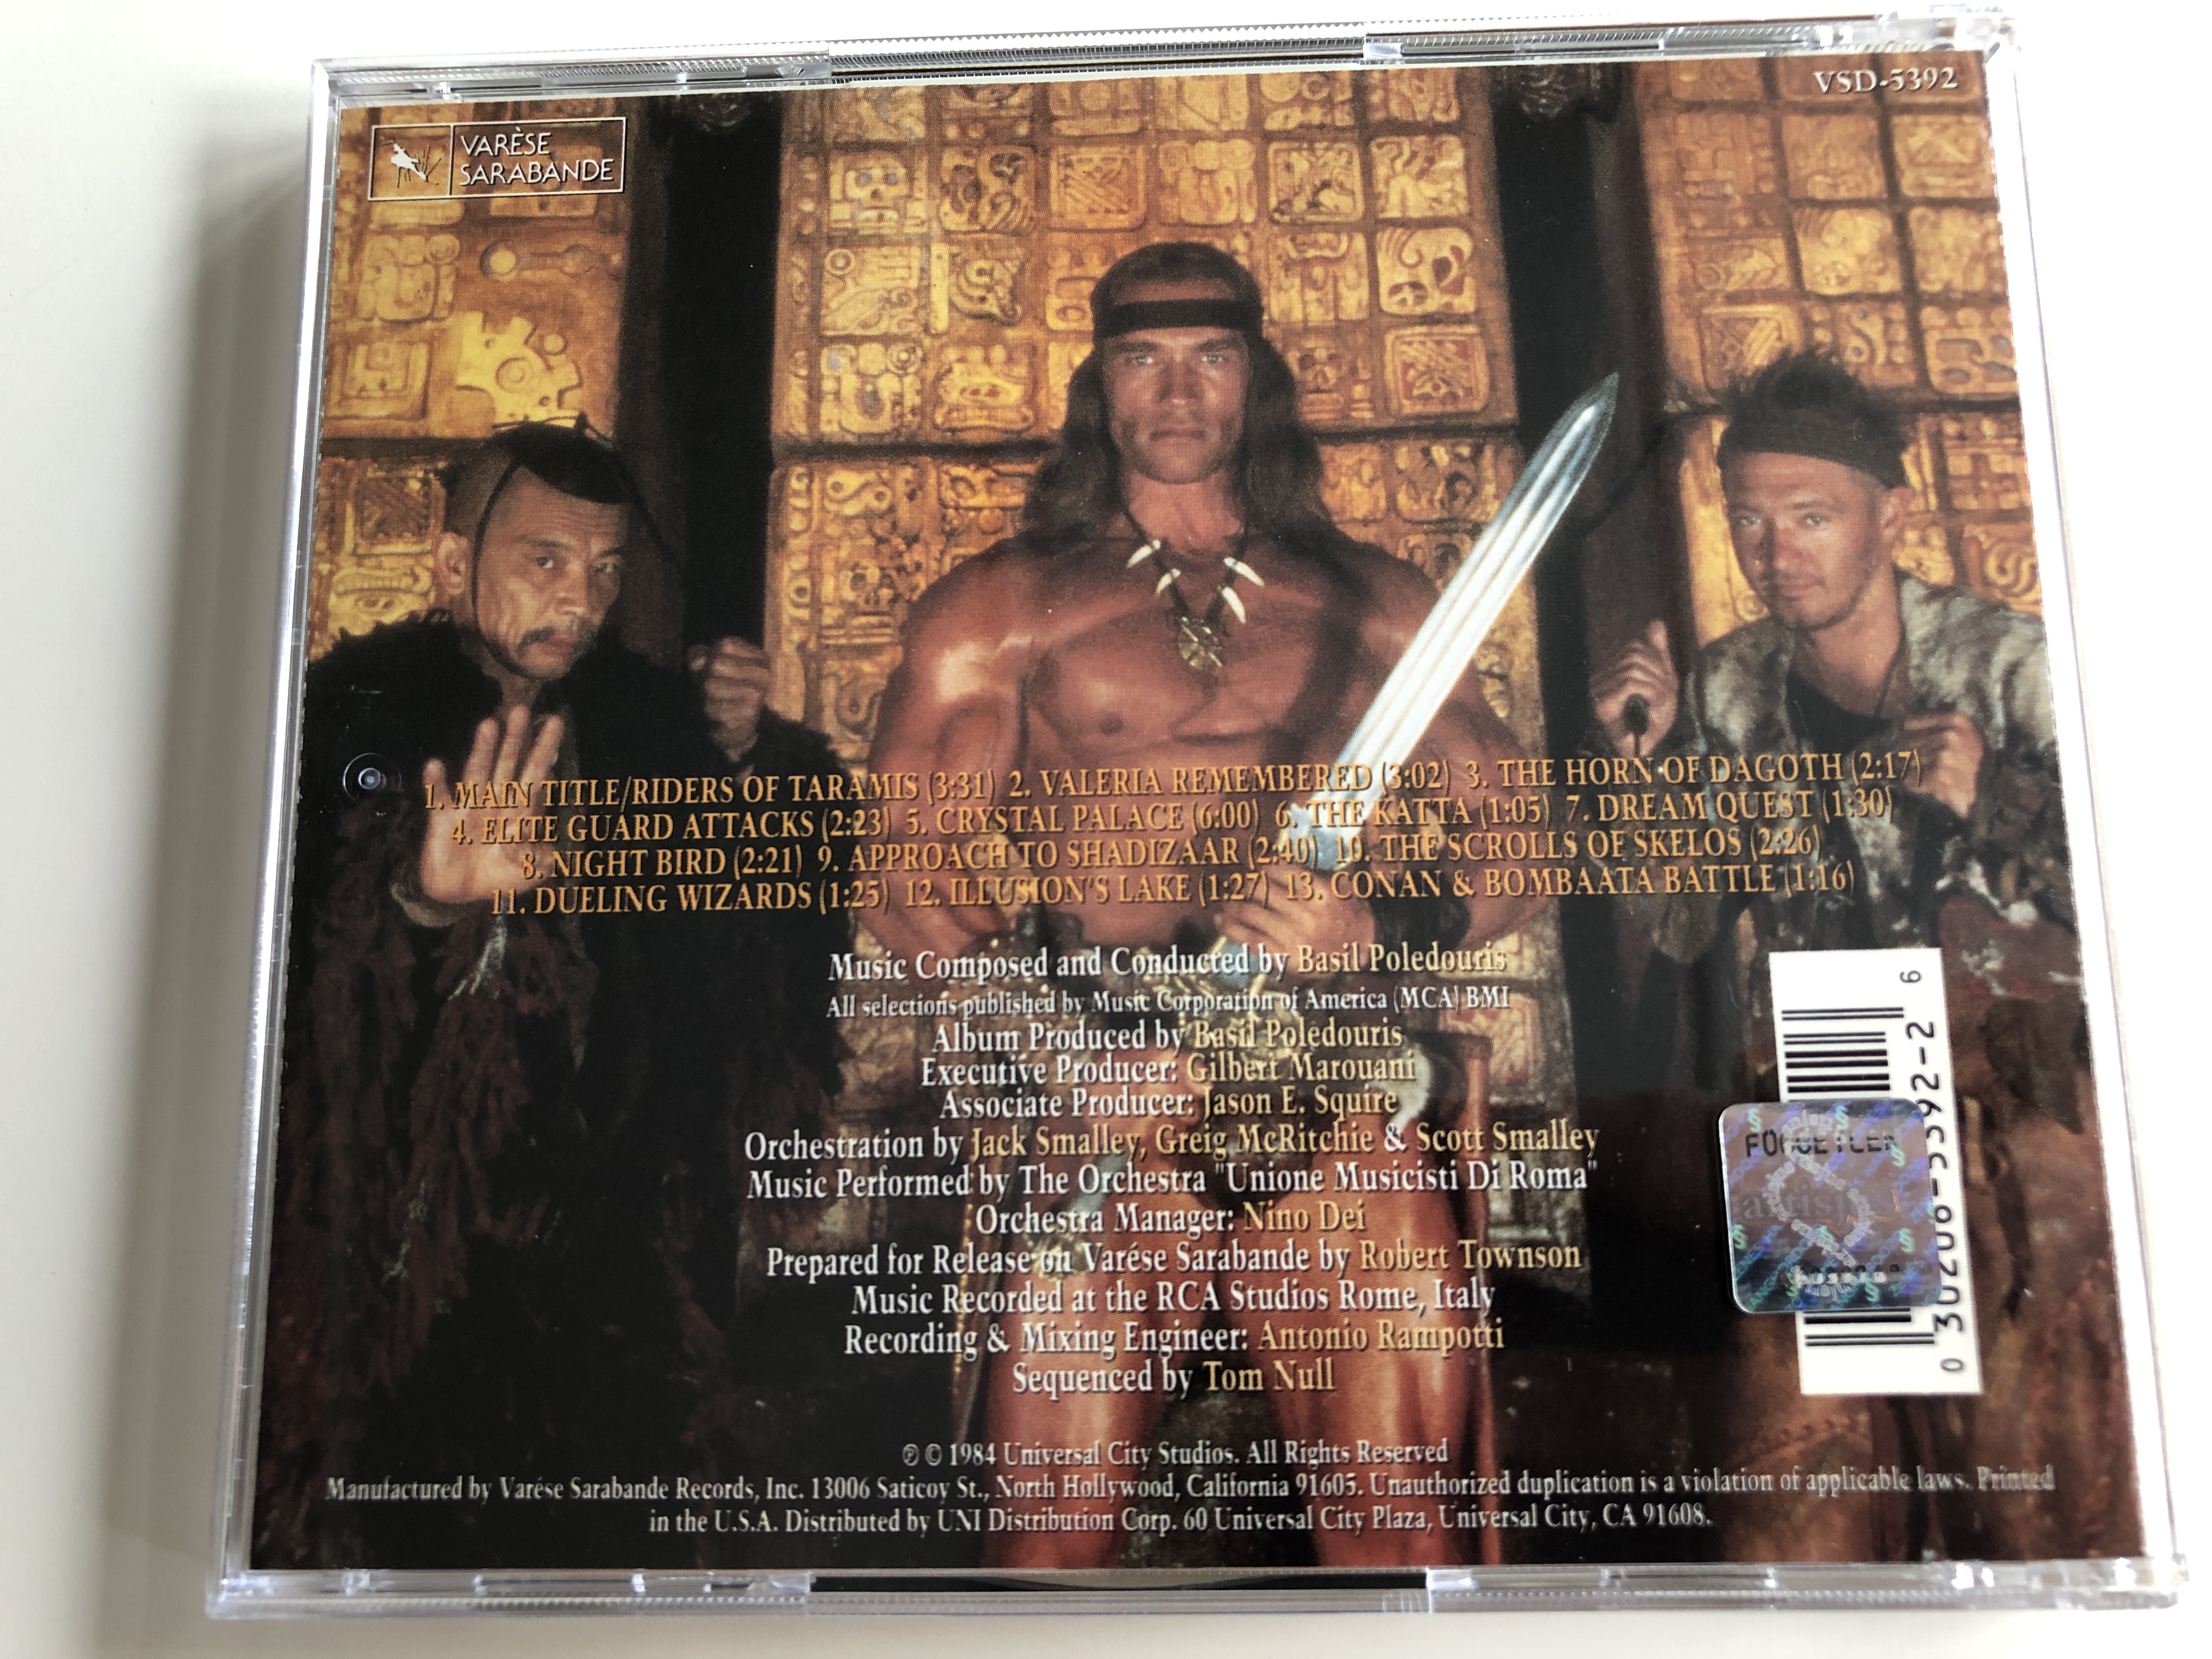 conan-the-destroyer-original-motion-picture-soundtrack-composed-and-conducted-by-basil-poledouris-audio-cd-vsd-5392-4-.jpg